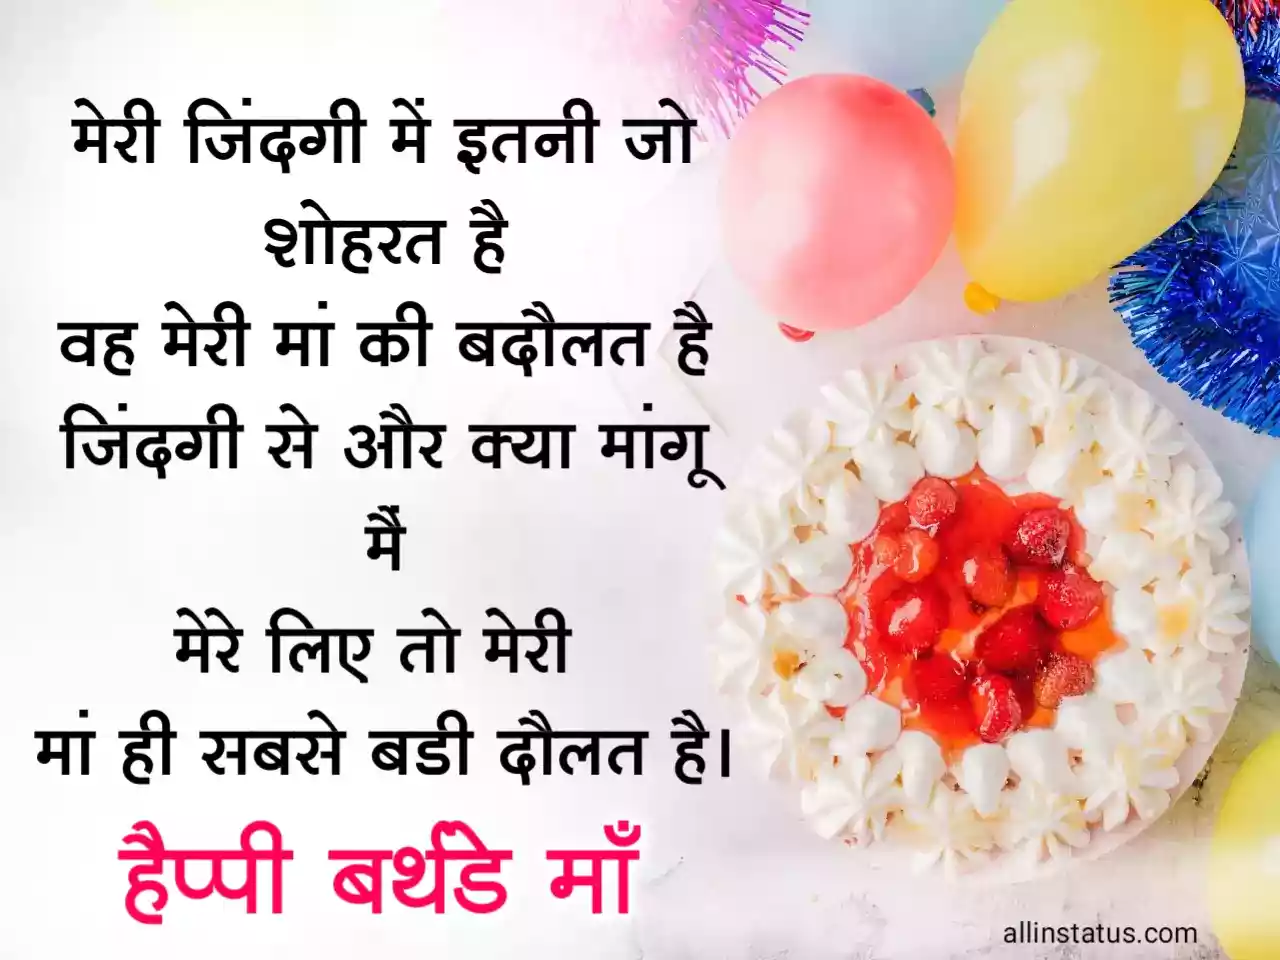 Happy birthday images for mother in hindi